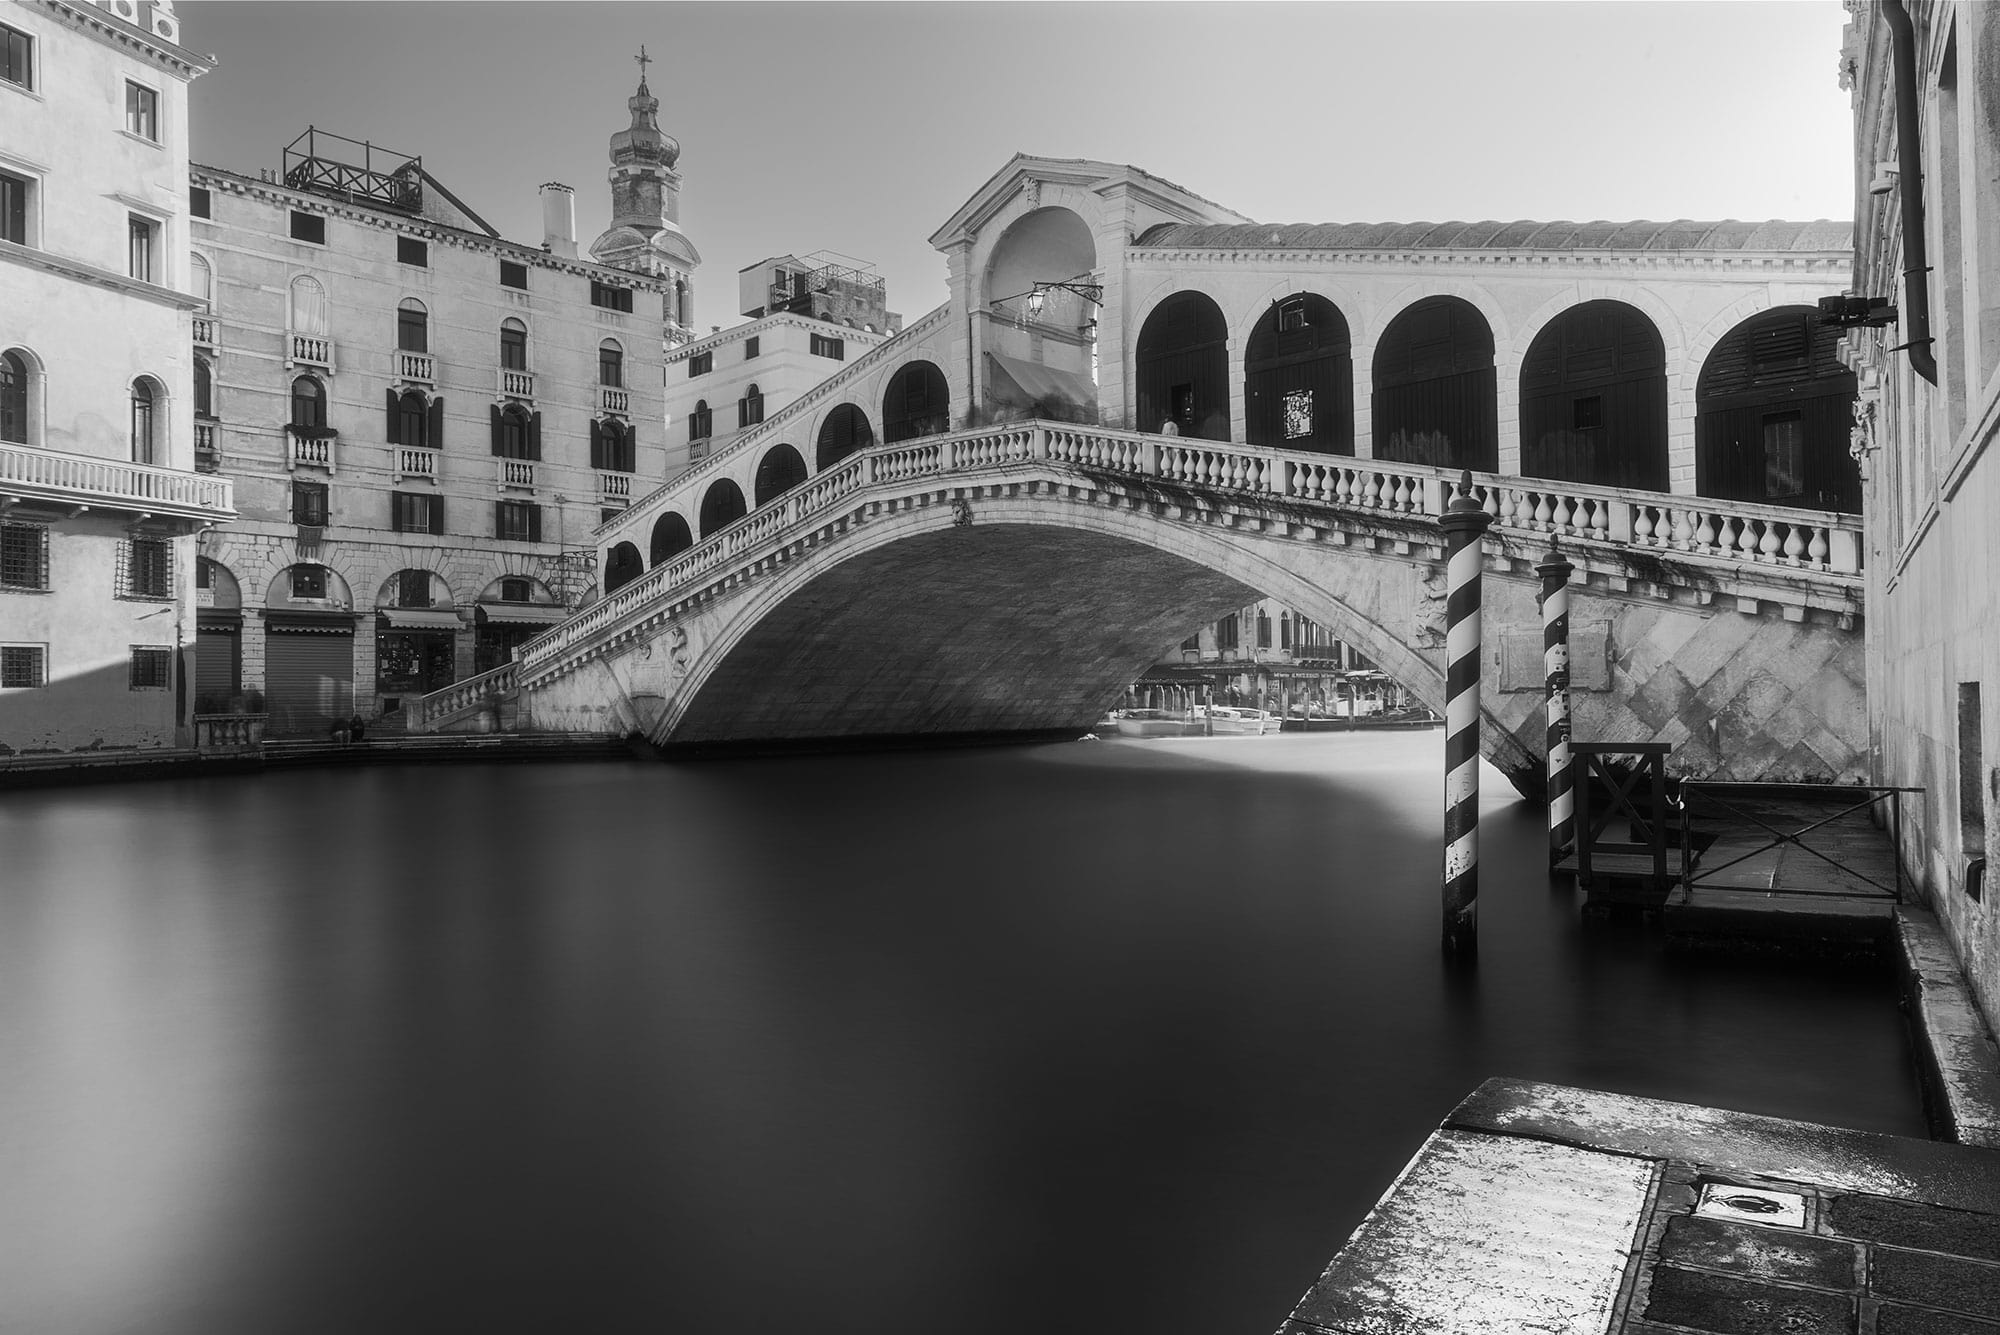 Experience the timeless allure of Venice's Rialto Bridge in this stunning black and white long exposure photograph. Captured with minimalist precision by travel photographer Jennifer Esseiva using her Nikon D810, this image exudes a sense of elegance and tranquility. The smooth waters of the canal create a striking contrast against the architectural marvel of the bridge, making it an ideal addition to elevate any office space. Let the iconic beauty of Venice inspire productivity and creativity with this captivating landscape photography masterpiece.